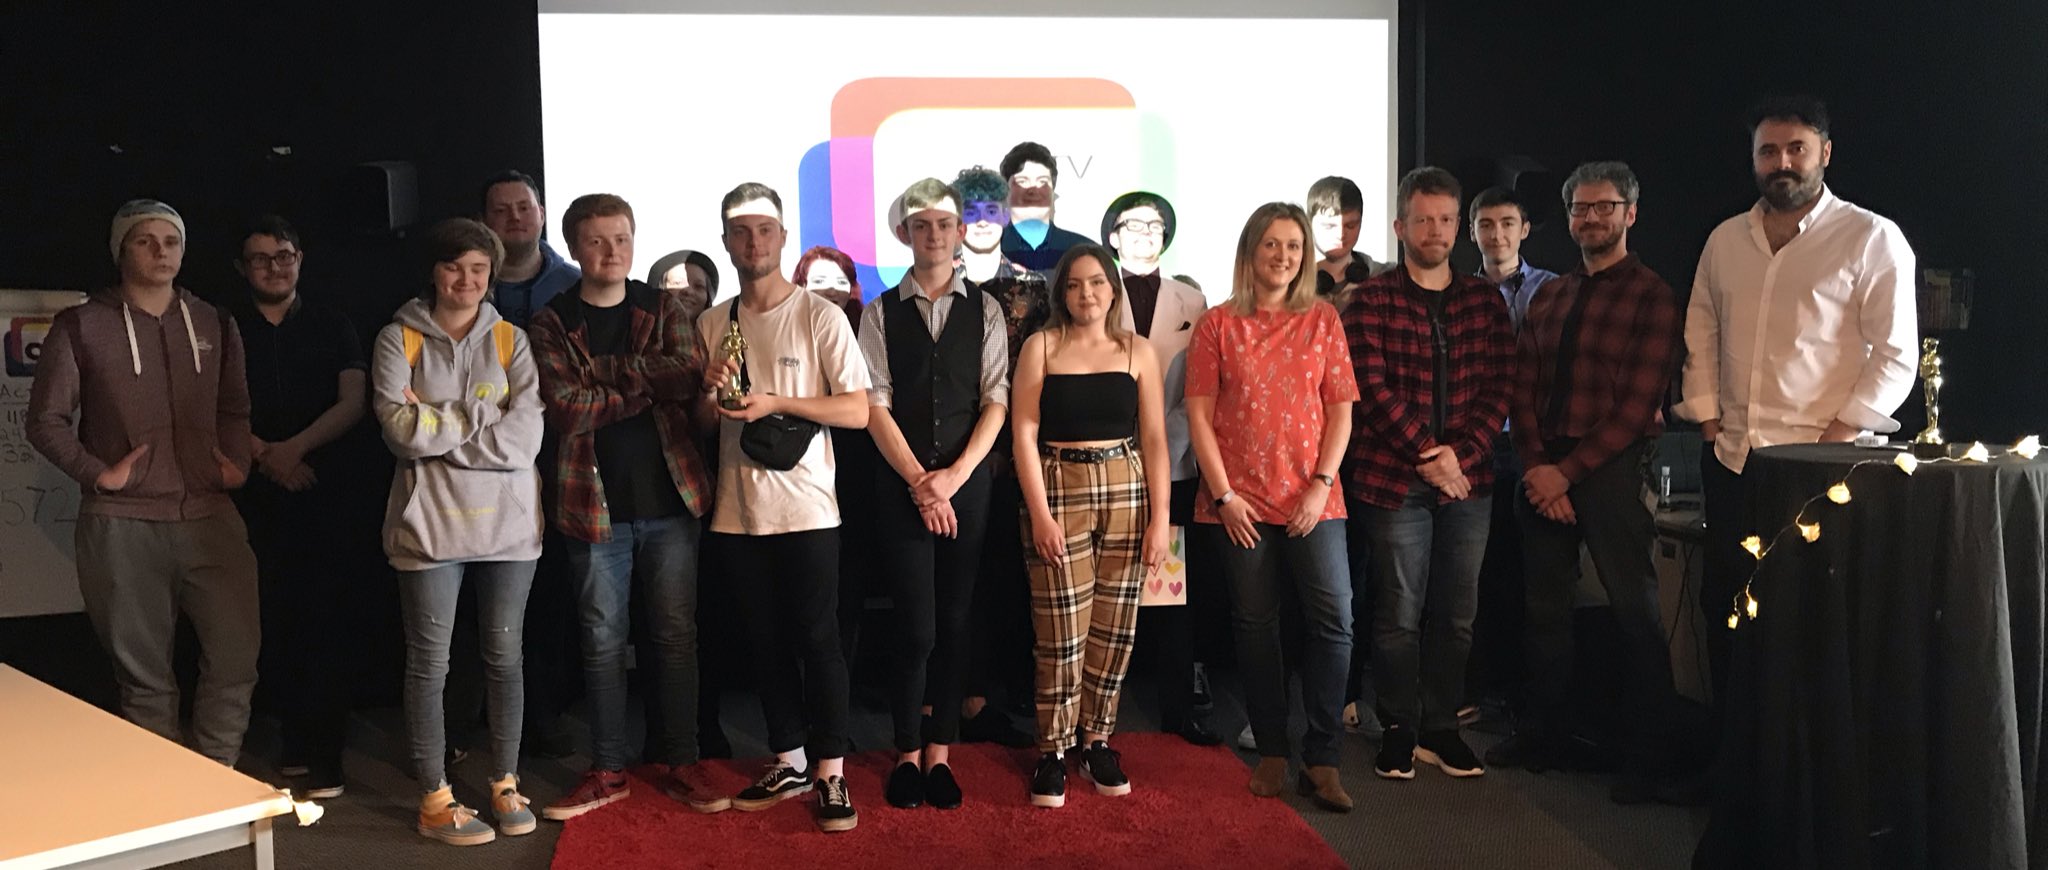 Student film festival held at Ayrshire College